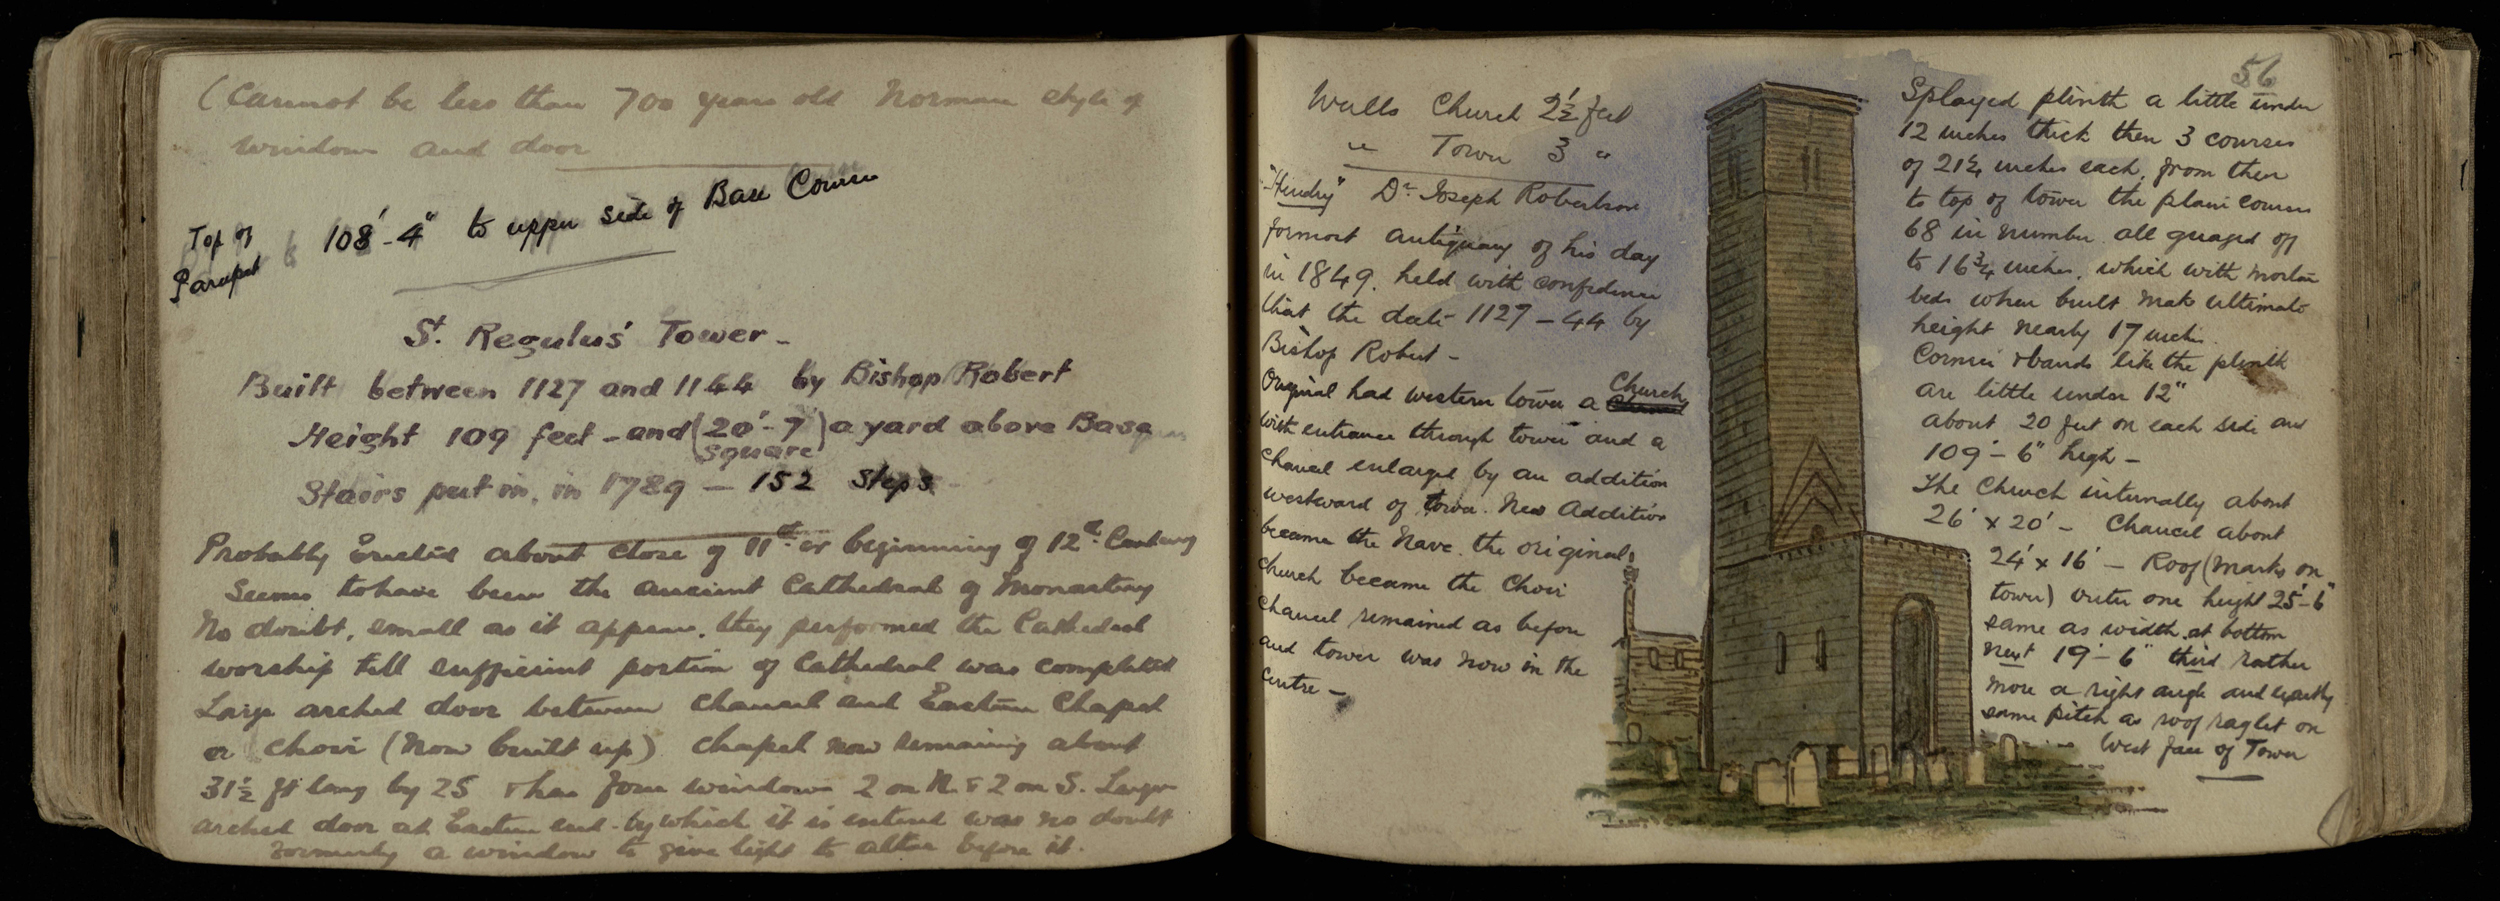 'St. Regulus' Tower' from John N. Bonthron's sketchbook, with the artist's copious notes (ms38539)